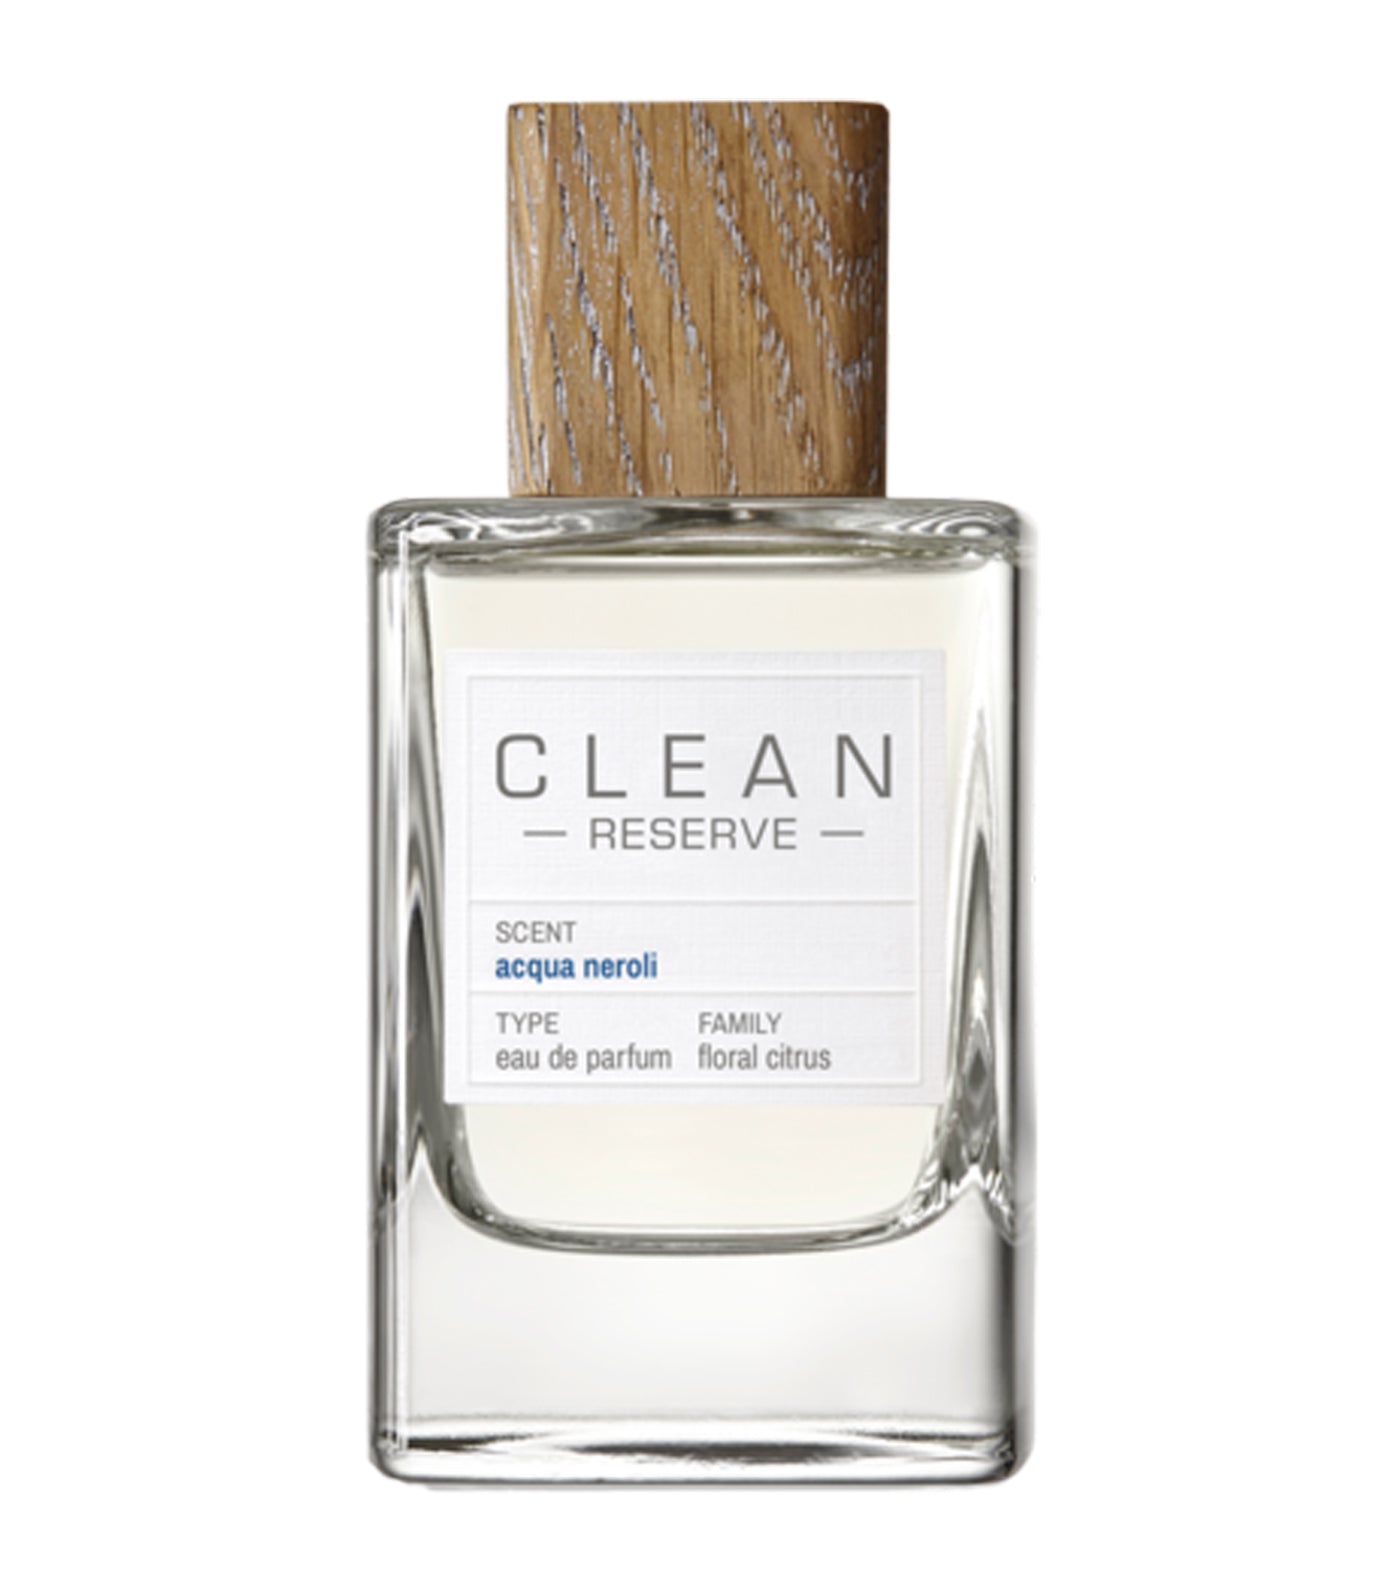 CLEAN RESERVE Acqua Neroli by CLEAN Beauty Collective